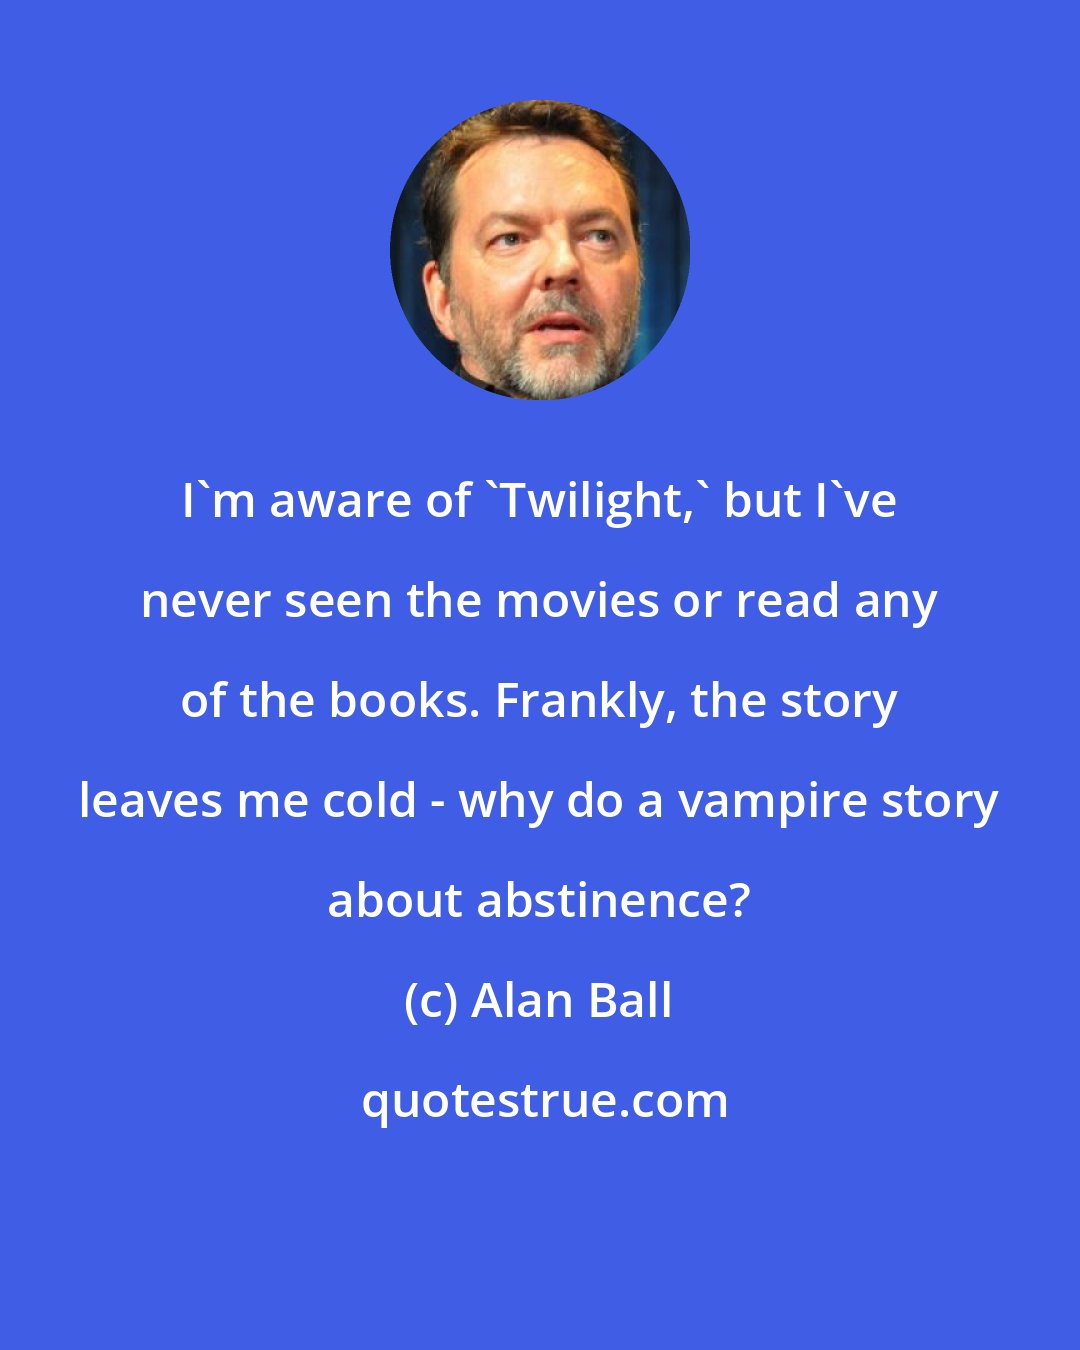 Alan Ball: I'm aware of 'Twilight,' but I've never seen the movies or read any of the books. Frankly, the story leaves me cold - why do a vampire story about abstinence?